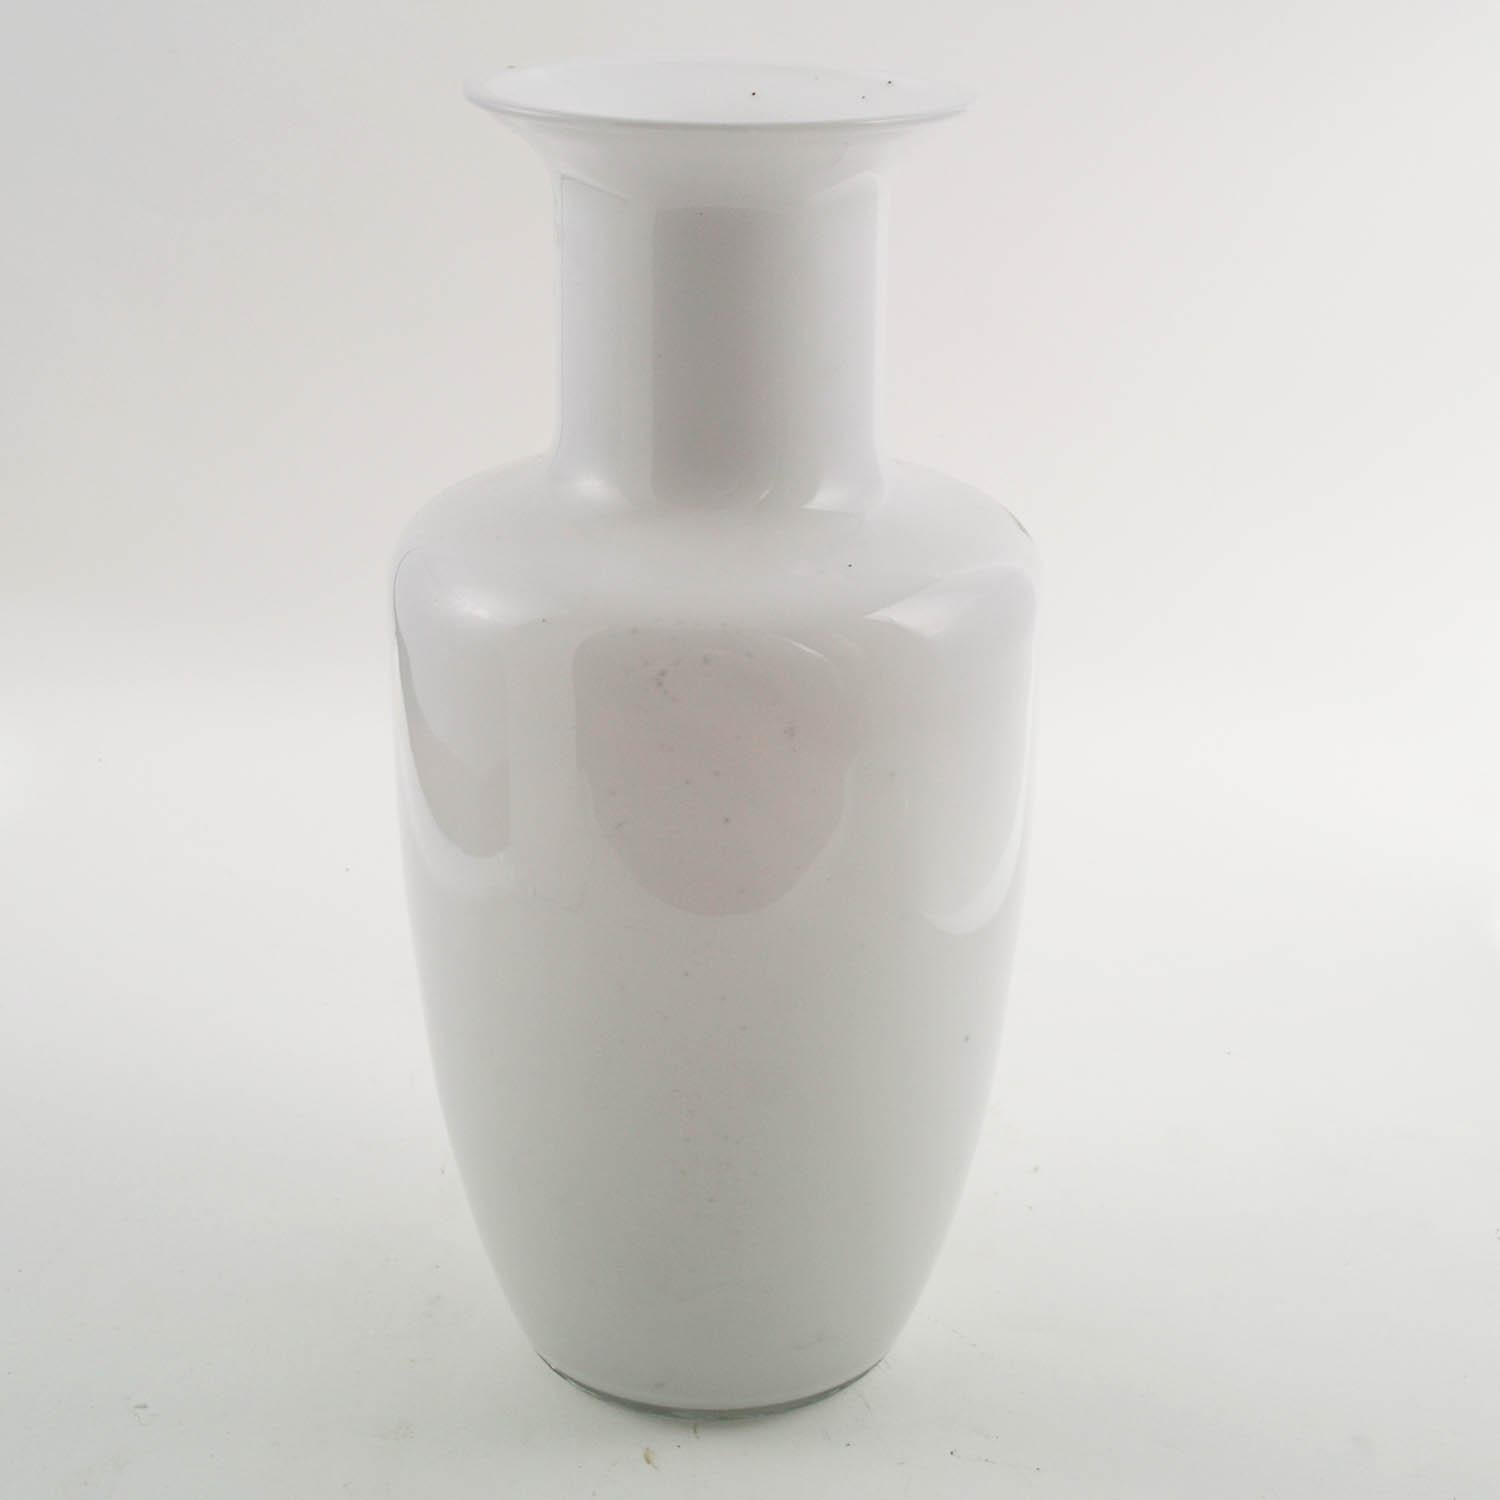 Mid-Century Modern Murano vase, Tapio Wirkkala for Venini attributed, lattimo Murano glass decorated

About:
Designed in 1968 by Tapio Wirkkala, these bottles are from the similar forms gently curved glass (lattimo Murano glass) decorated externally